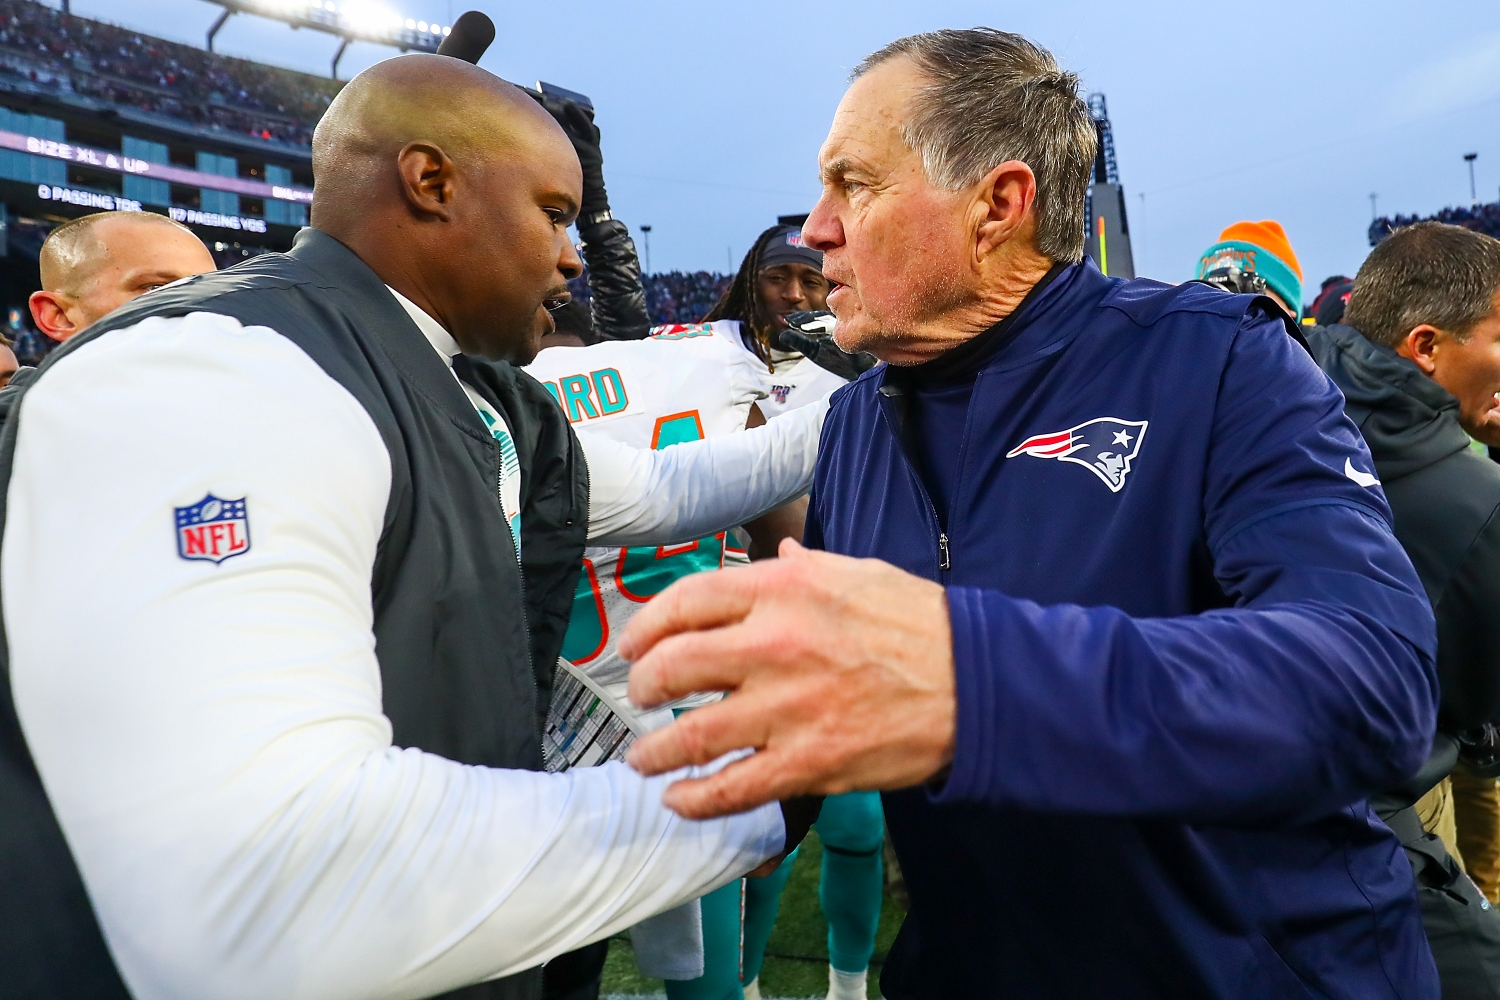 Miami Dolphins head coach Brian Flores embraces Patriots head coach Bill Belichick after a game.